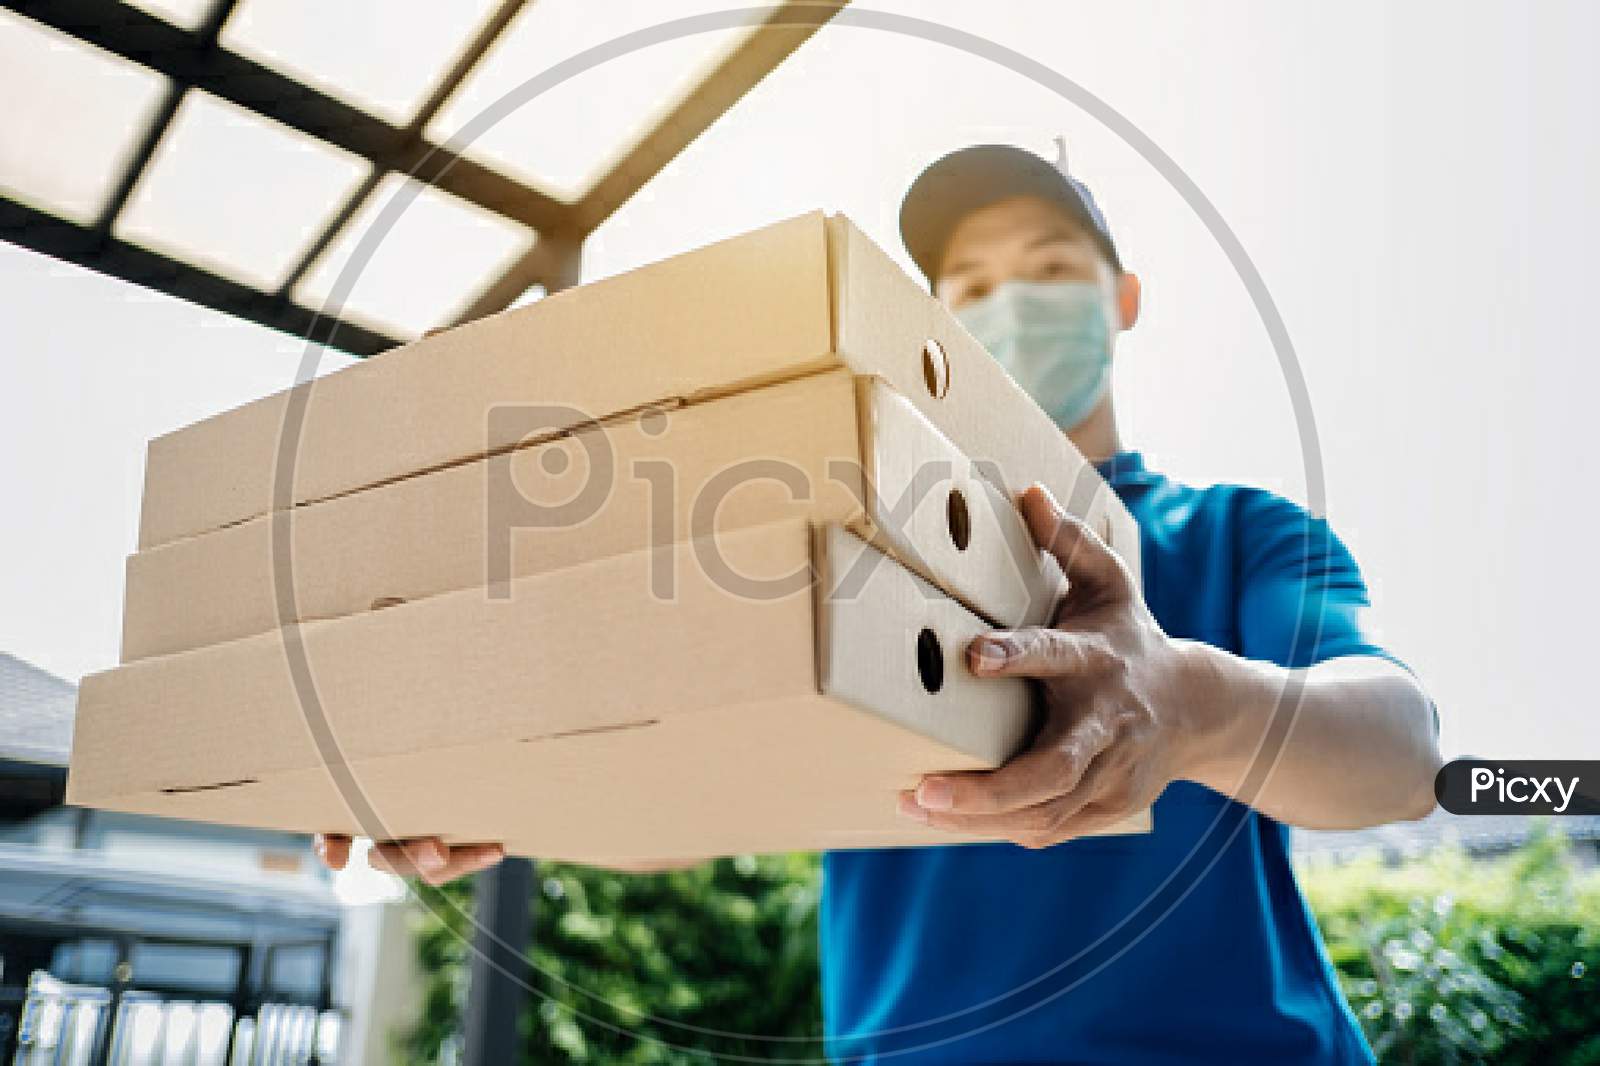 Asian Delivery Man Wearing Mask Send A Pizza Food On Front Home Receiver Shipping Deliver Social Distancing While The Virus Is Spreading And Prevention Crisis Coronavirus Covid-19 Front Home Customer.